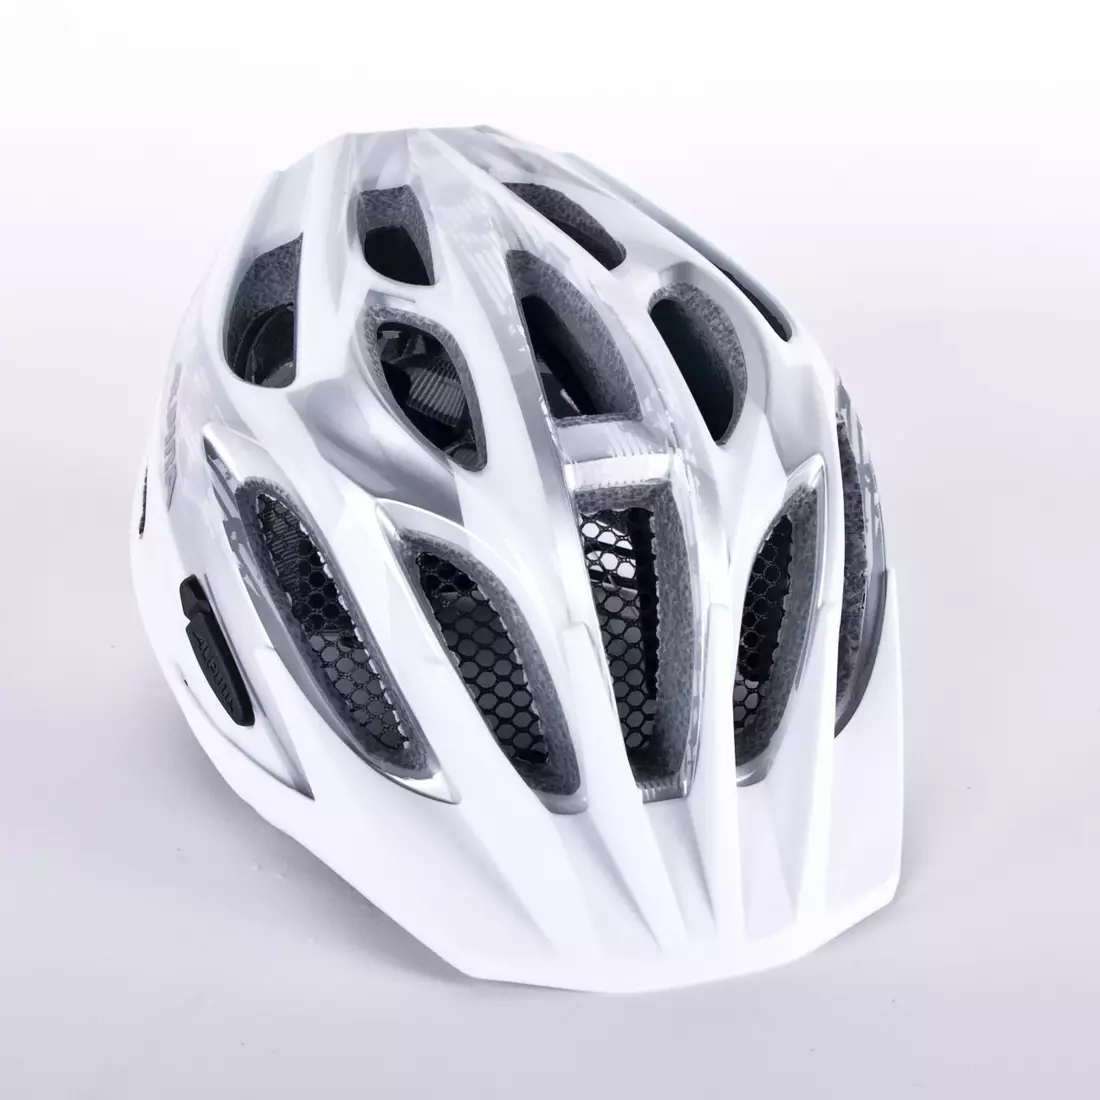 ALPINA TOUR 2.0 bicycle helmet silver and white